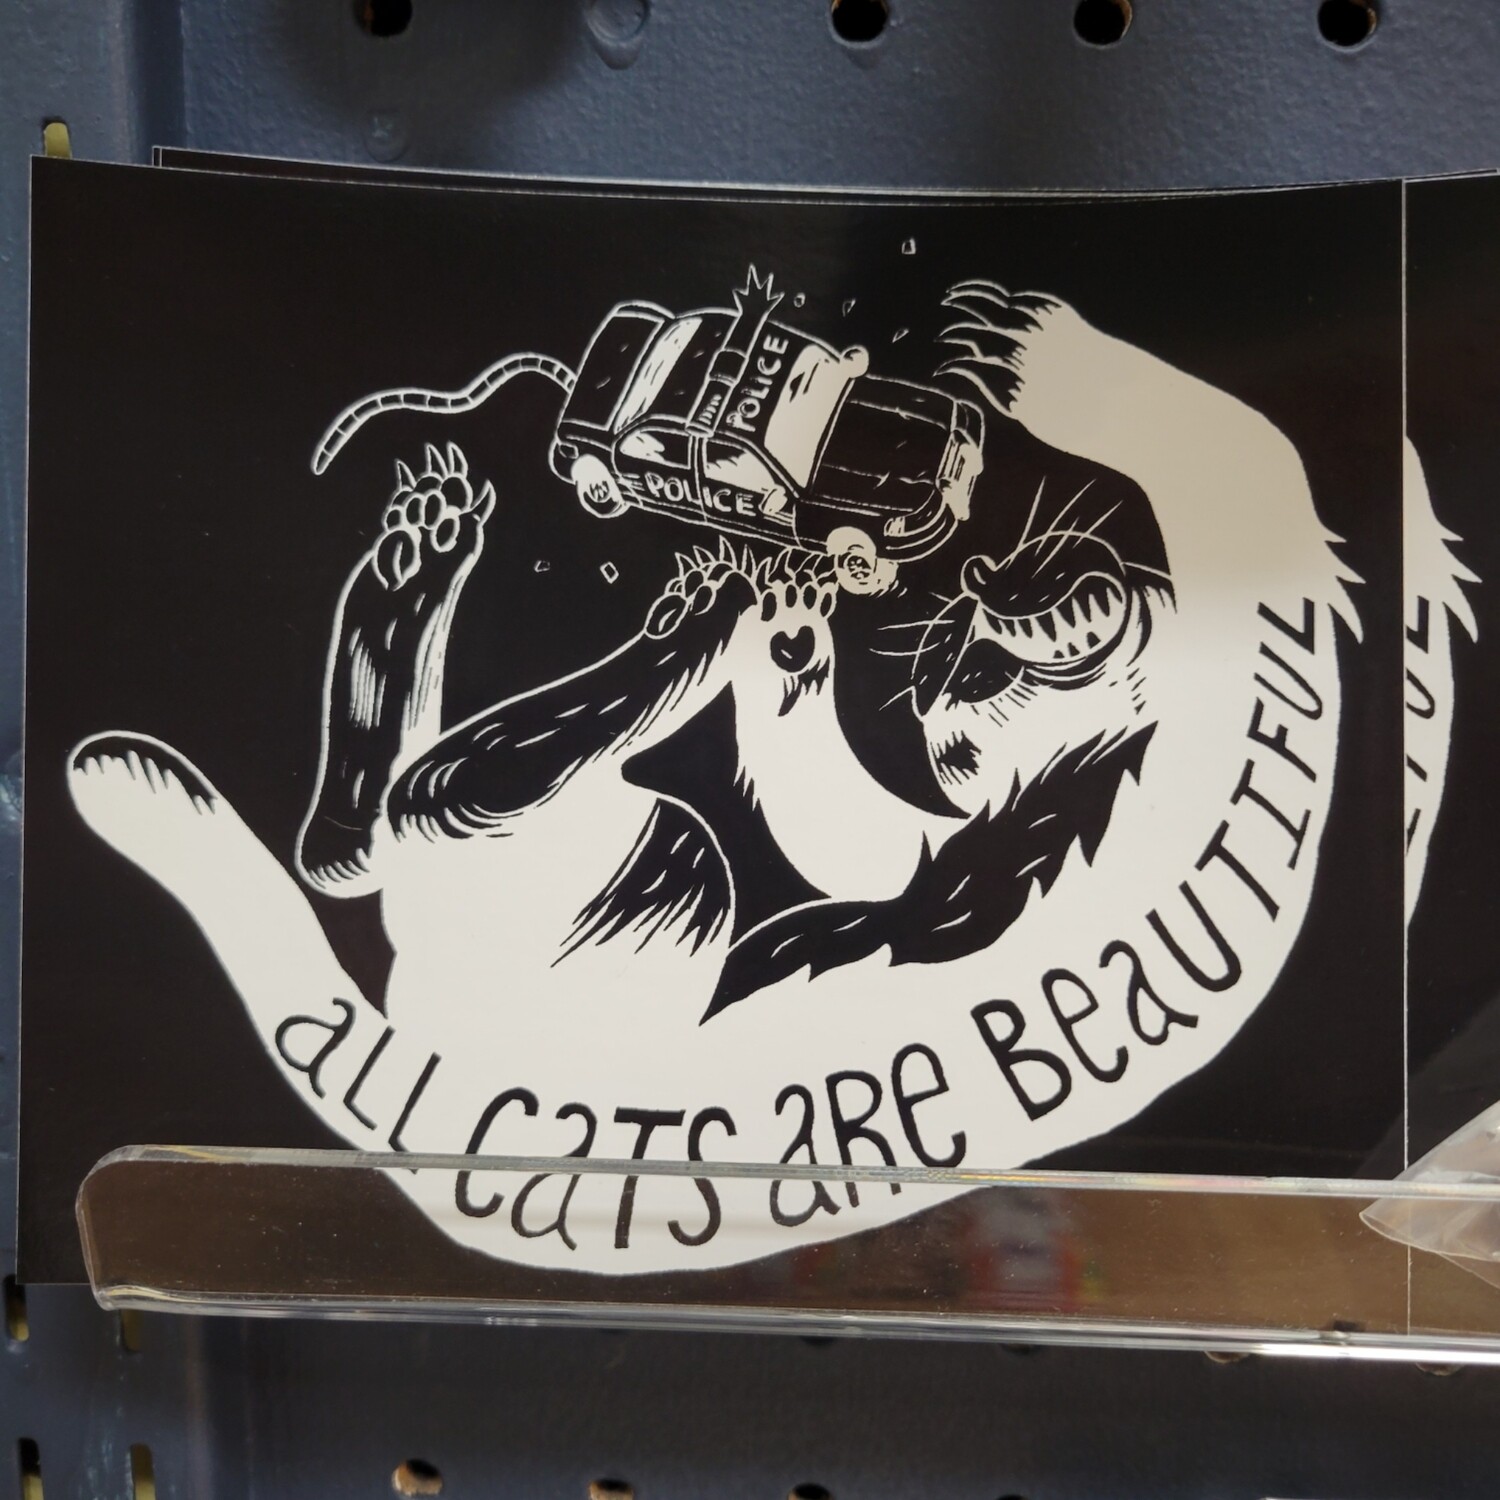 All Cats Are Beautiful - Sticker by Ben Passmore